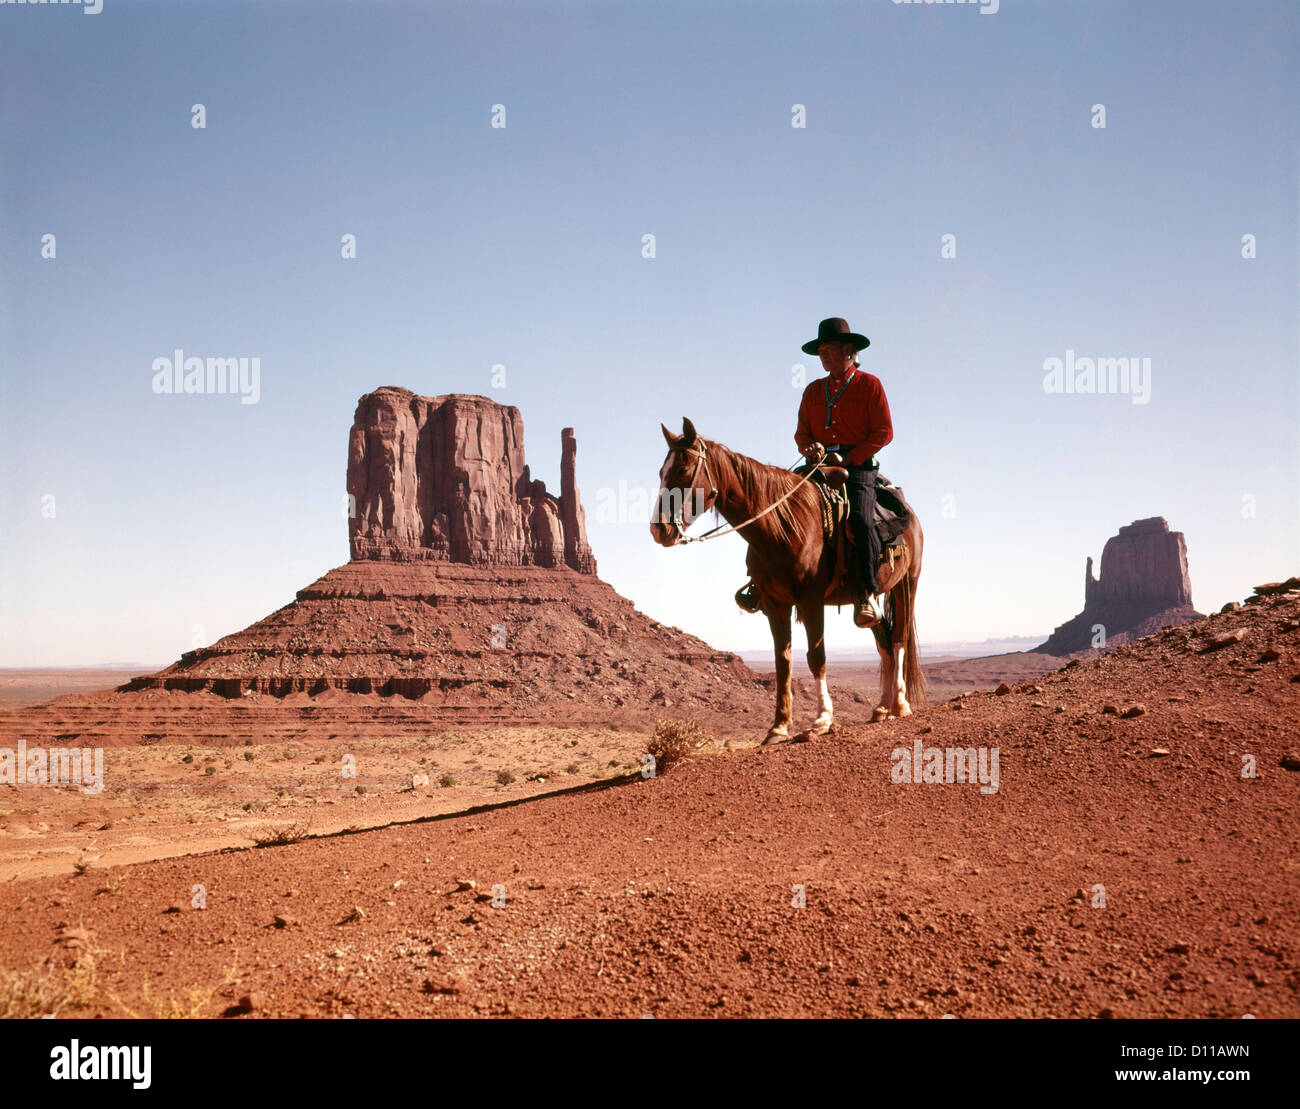 1960s NAVAJO MAN ON HORSE MONUMENT VALLEY NAVAJO TRIBAL RESERVATION USA Stock Photo